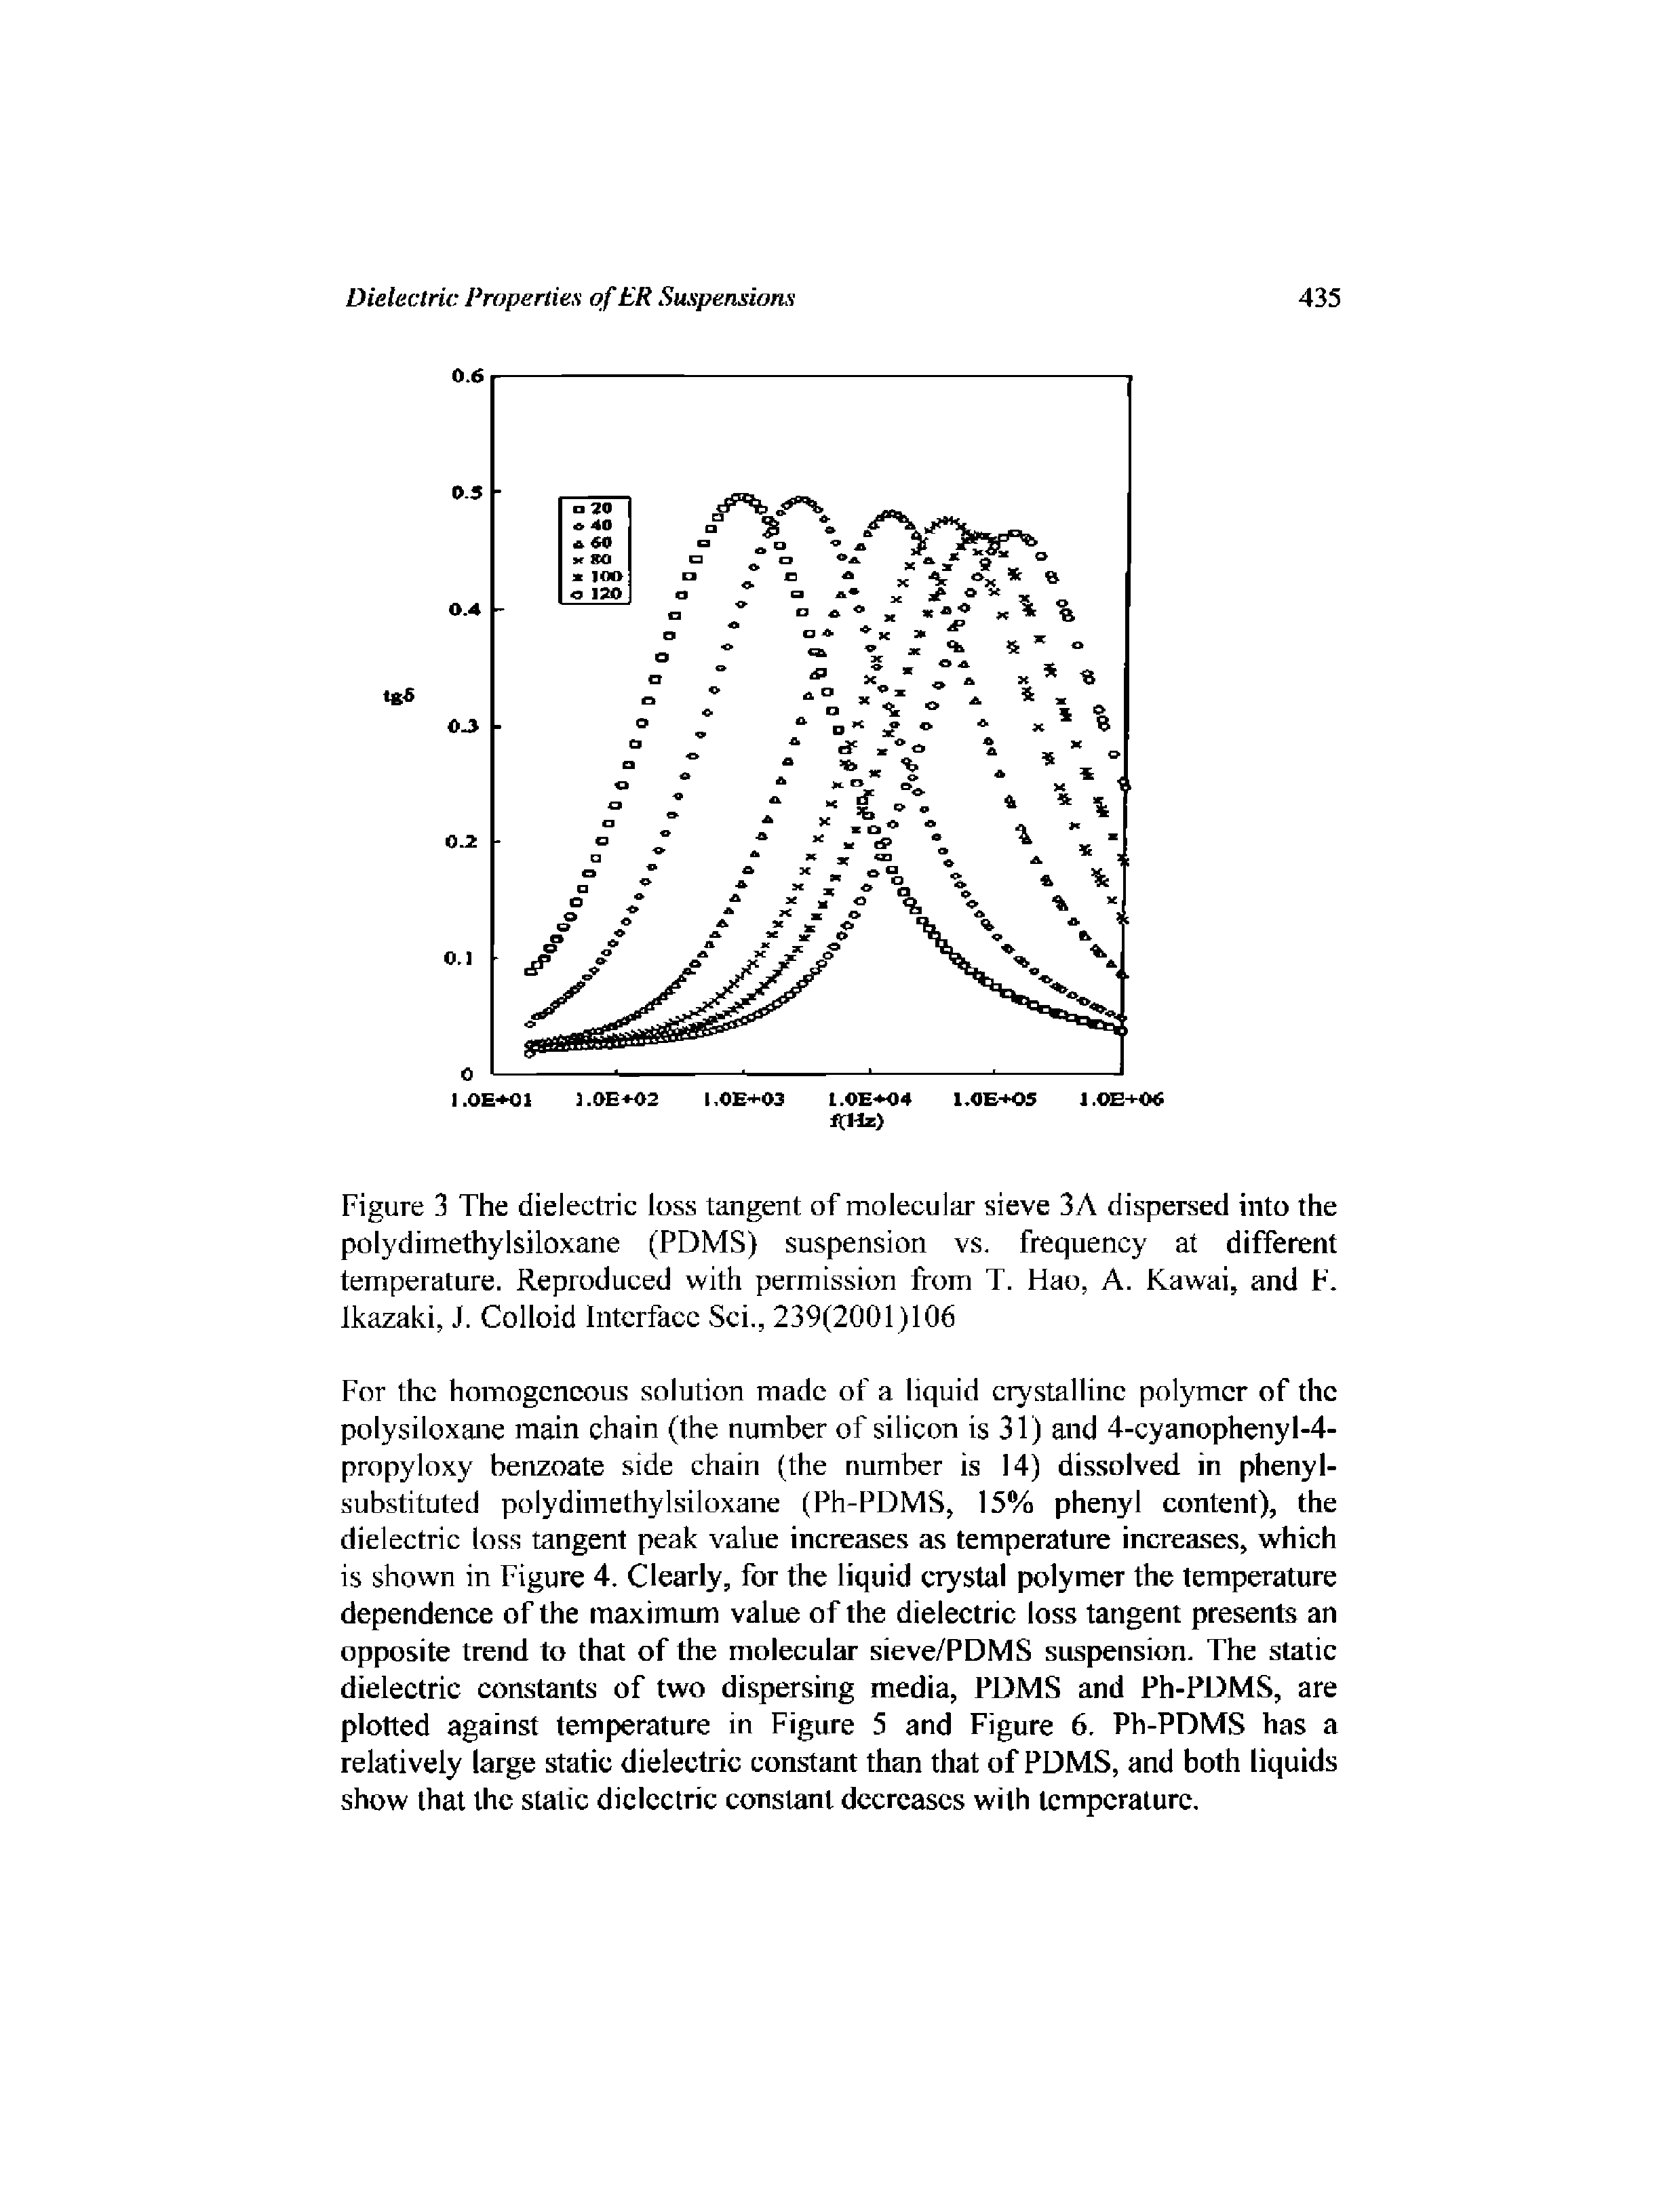 Figure 3 The dielectric loss tangent of molecular sieve 3A dispersed into the polydimethylsiloxane (PDMS) suspension vs. frequency at different temperature. Reproduced with permission from T. Hao, A. Kawai, and F. Ikazaki, J. Colloid Interface Sci., 239(2001)106...